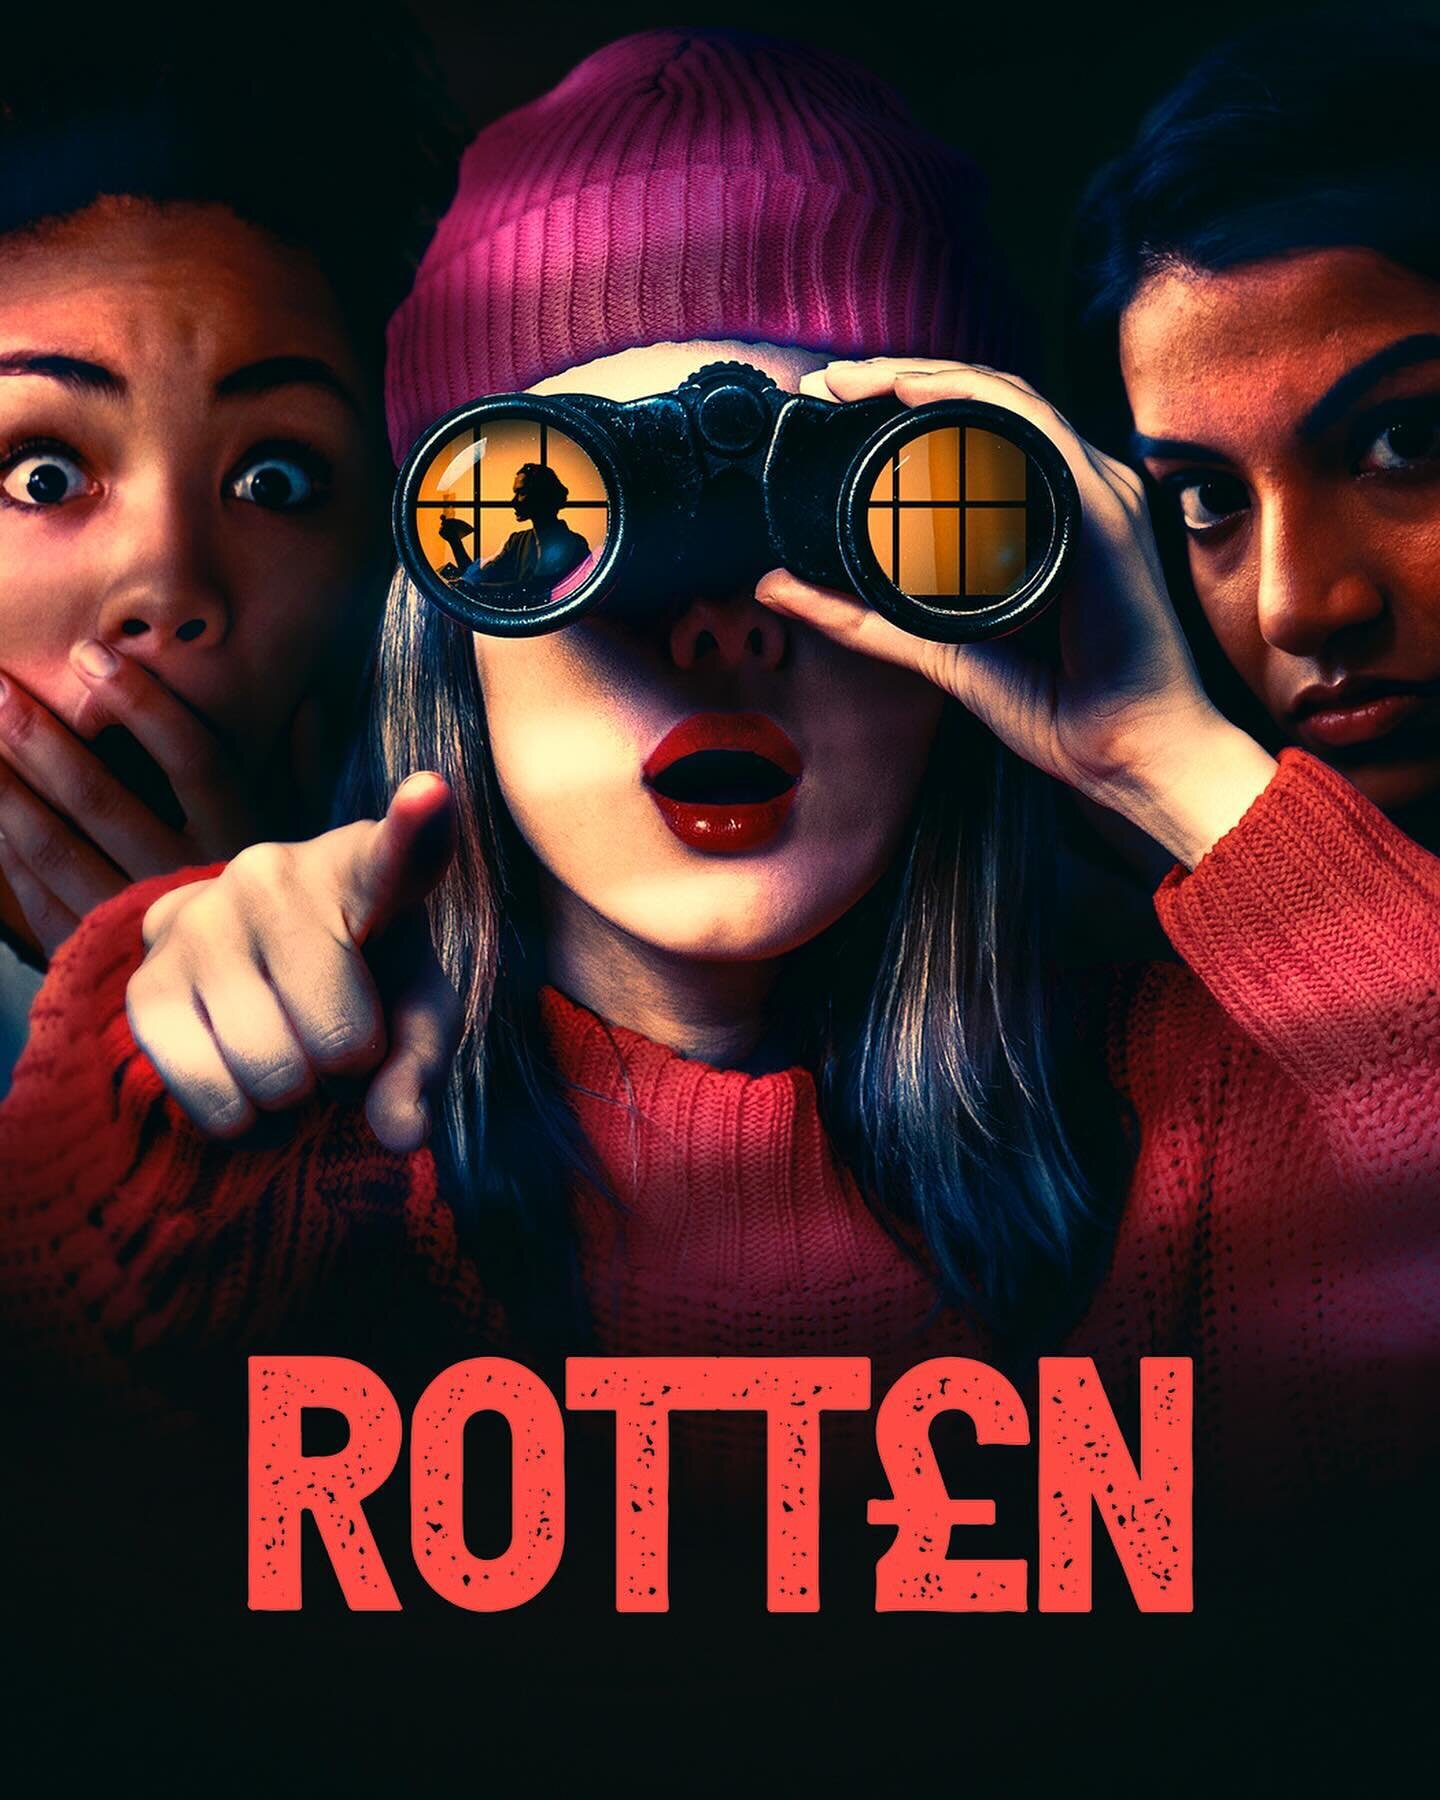 A thrilling first week of rehearsal comes to an end and our ROTTEN spring tour is almost ready to launch! 

This brilliant new play by @josiemw1 and directed by @rikkibeadleblair stars @narishalawson @kavitav22 @tikkinaggart @samabutters @aliceberry1